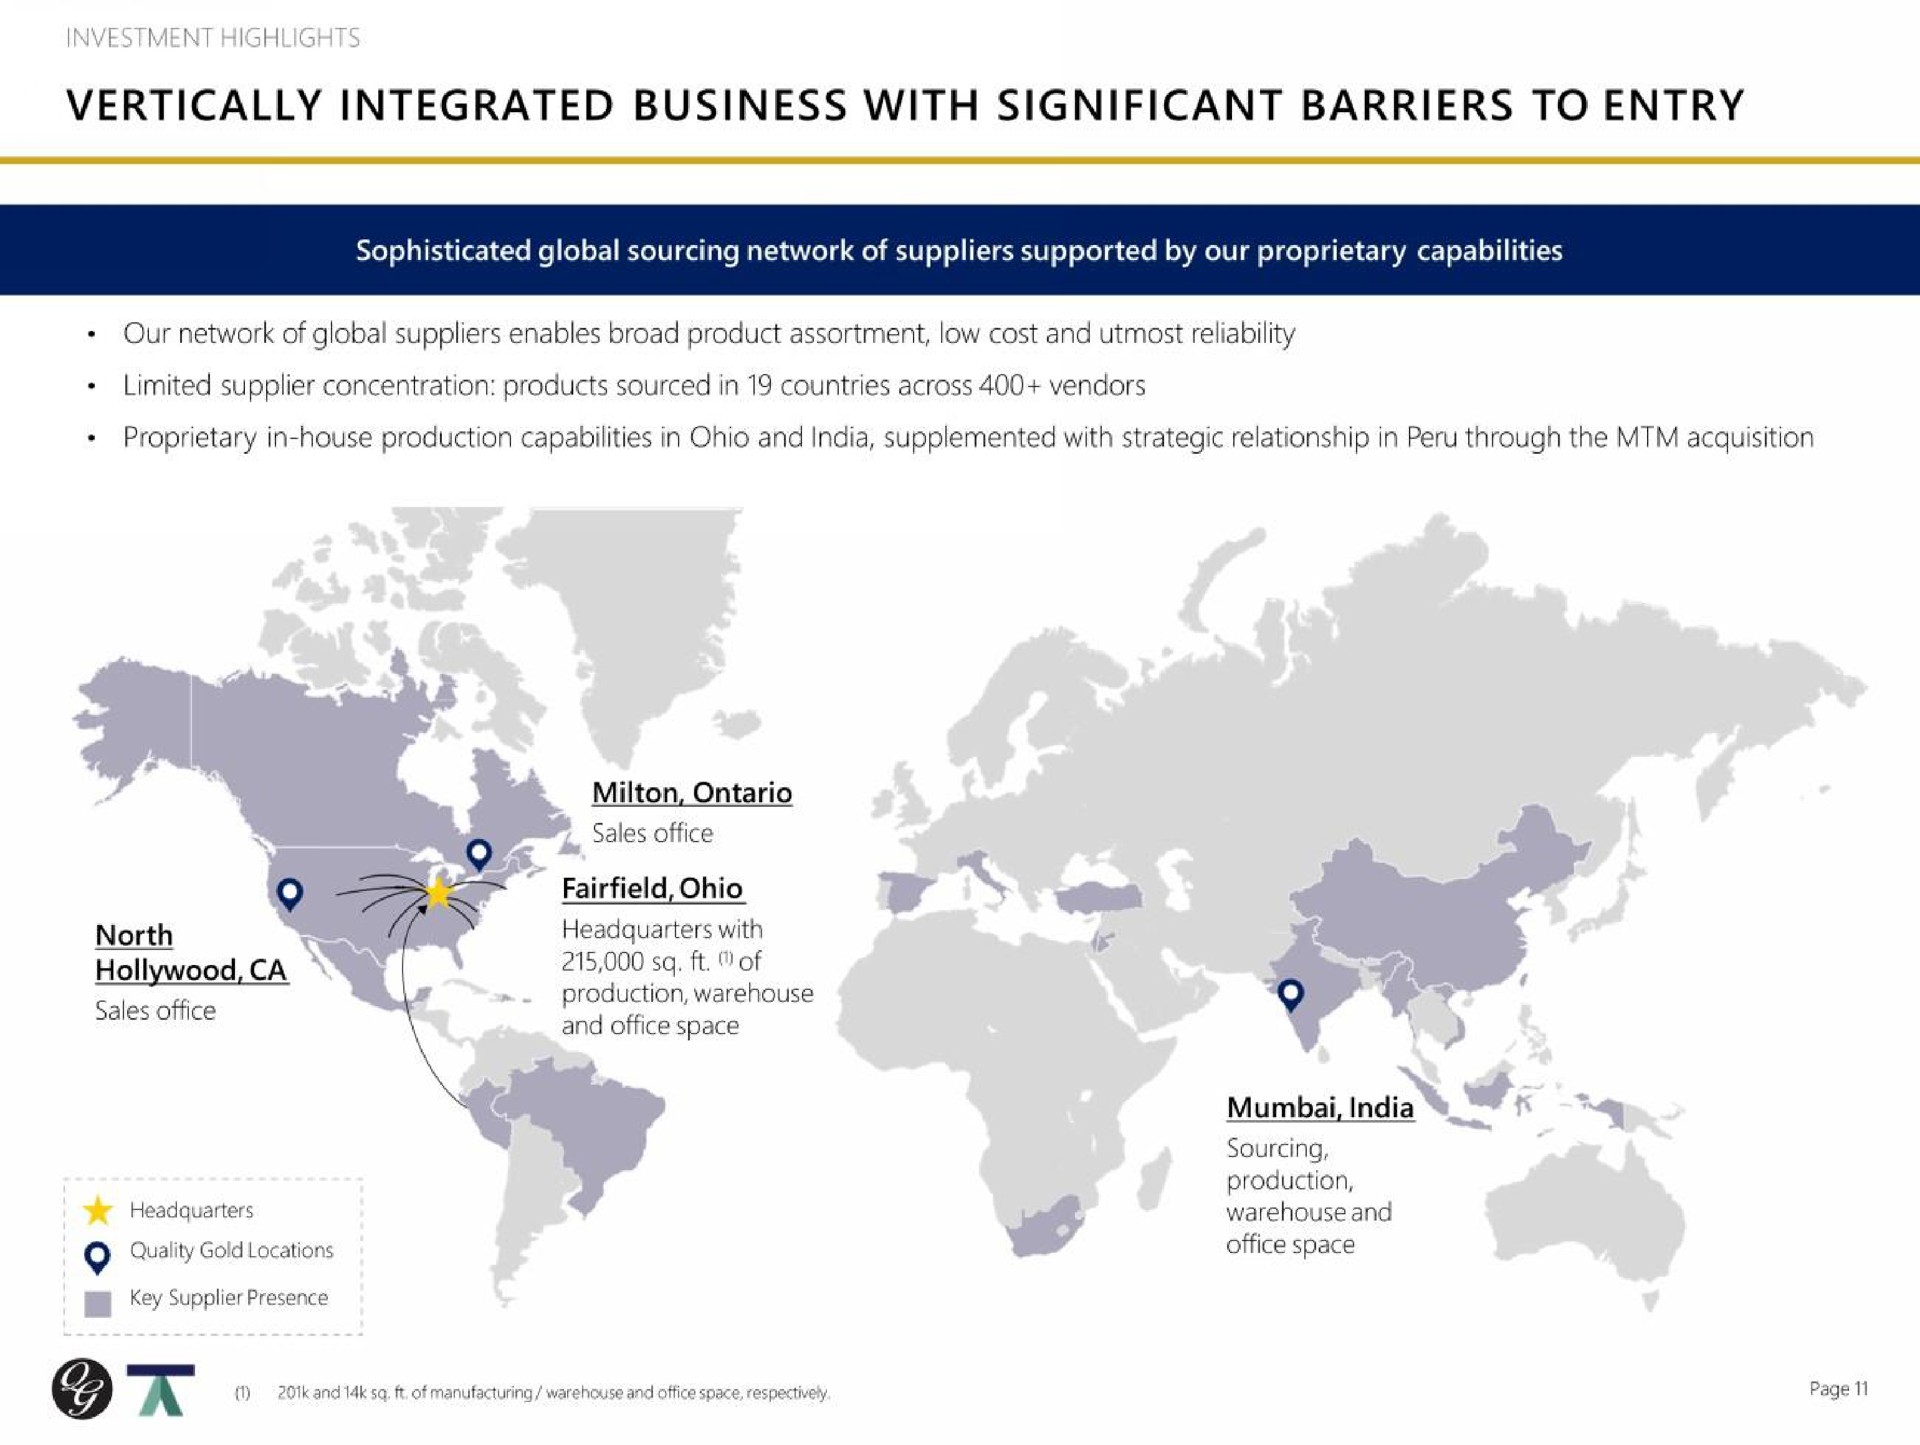 vertically integrated business with significant barriers to entry | Quality Gold